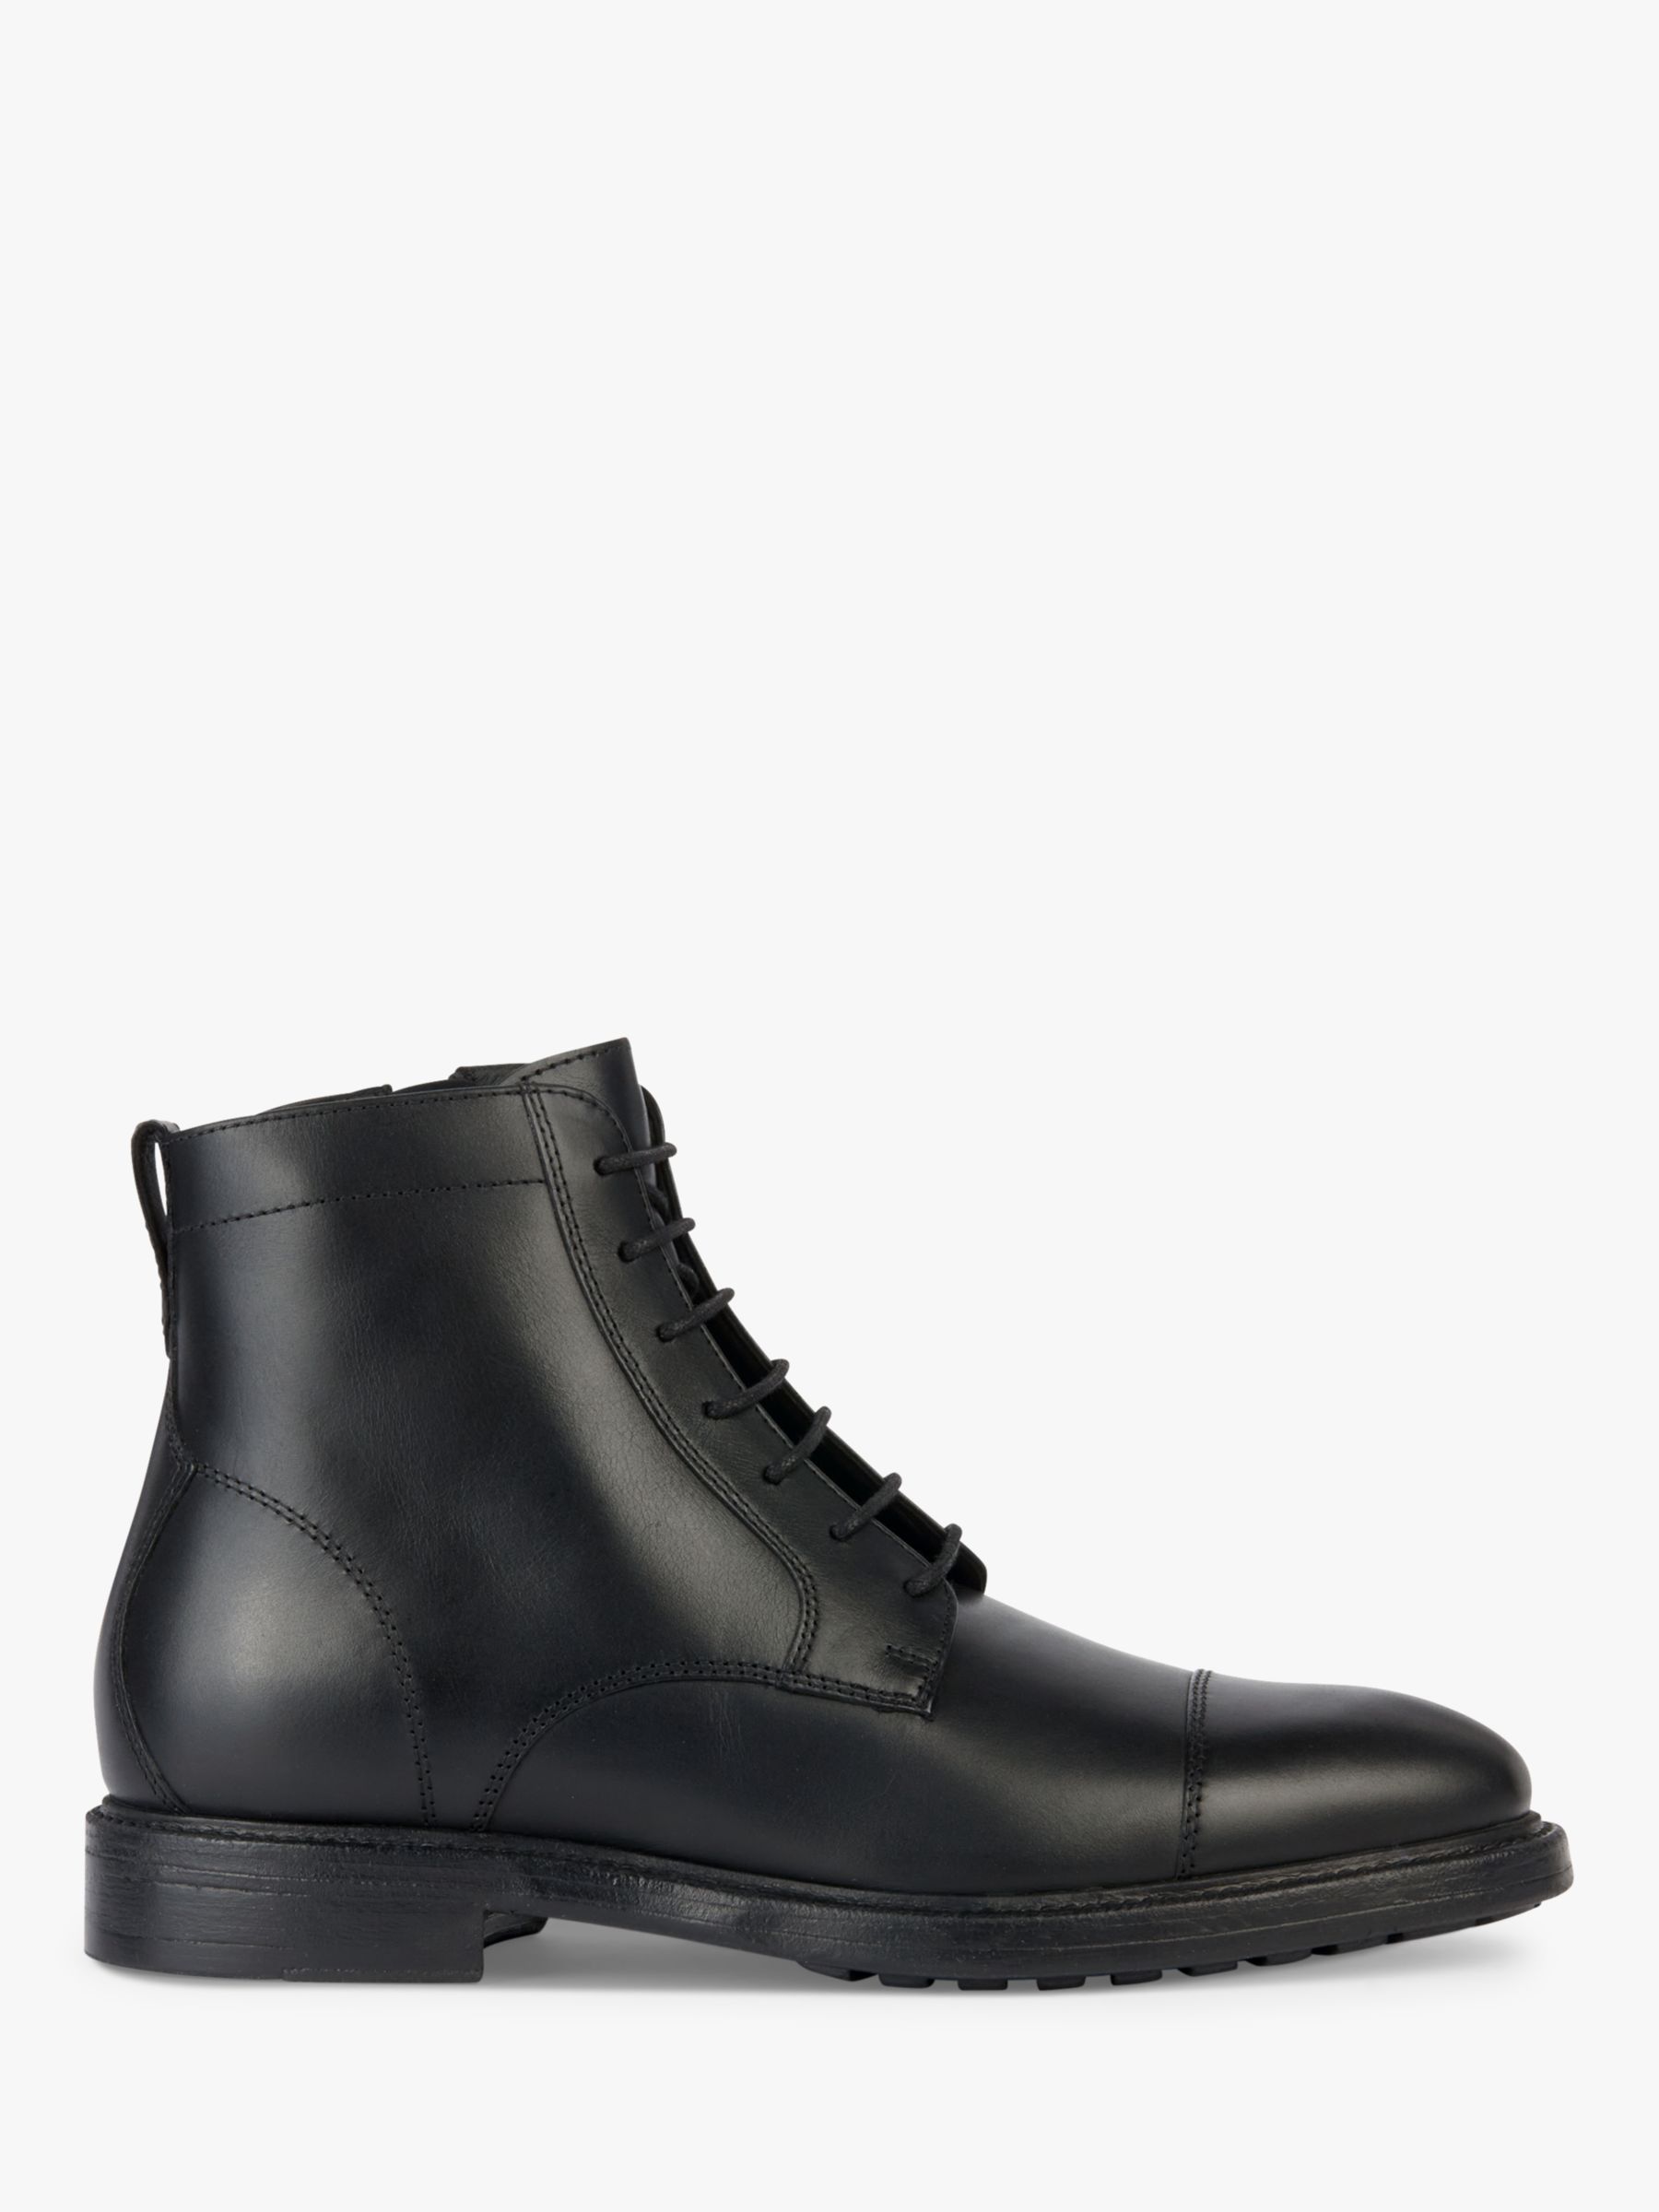 Geox Tiberio Leather Ankle Boots